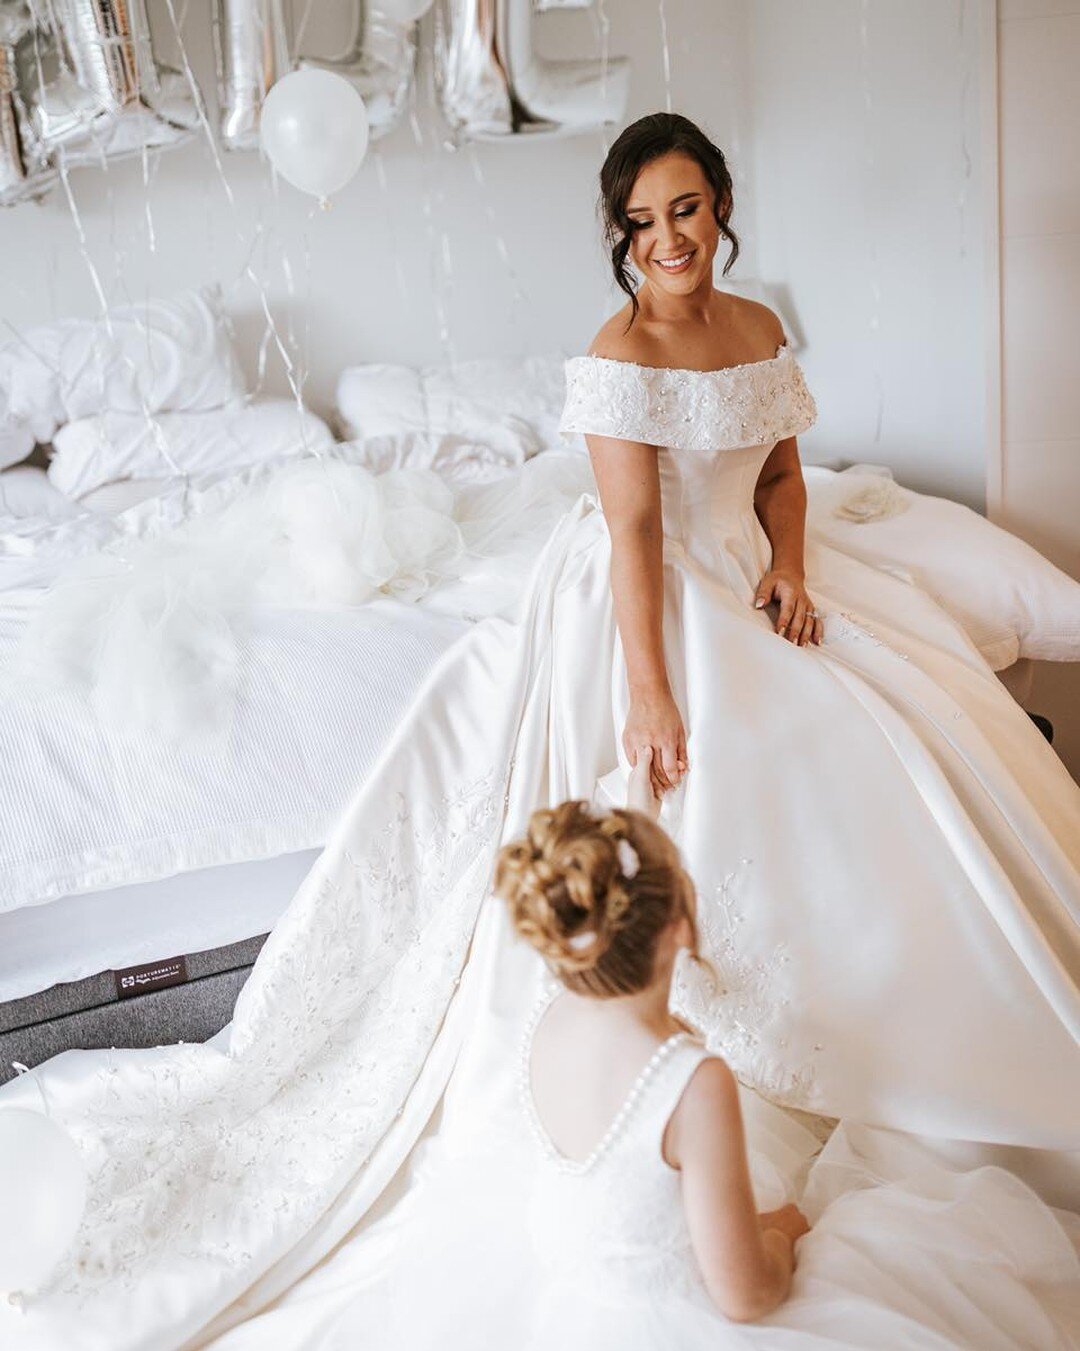 The bond between a bride and her flower girl 🥰

Sarah Lazich

Www.neatonphotography.com

#sydneywedding #sydneyweddings #sydneyweddingphotographer #wollongongwedding #wollongongweddings #wollongongweddingphotographer #bowralwedding #bowralweddings #